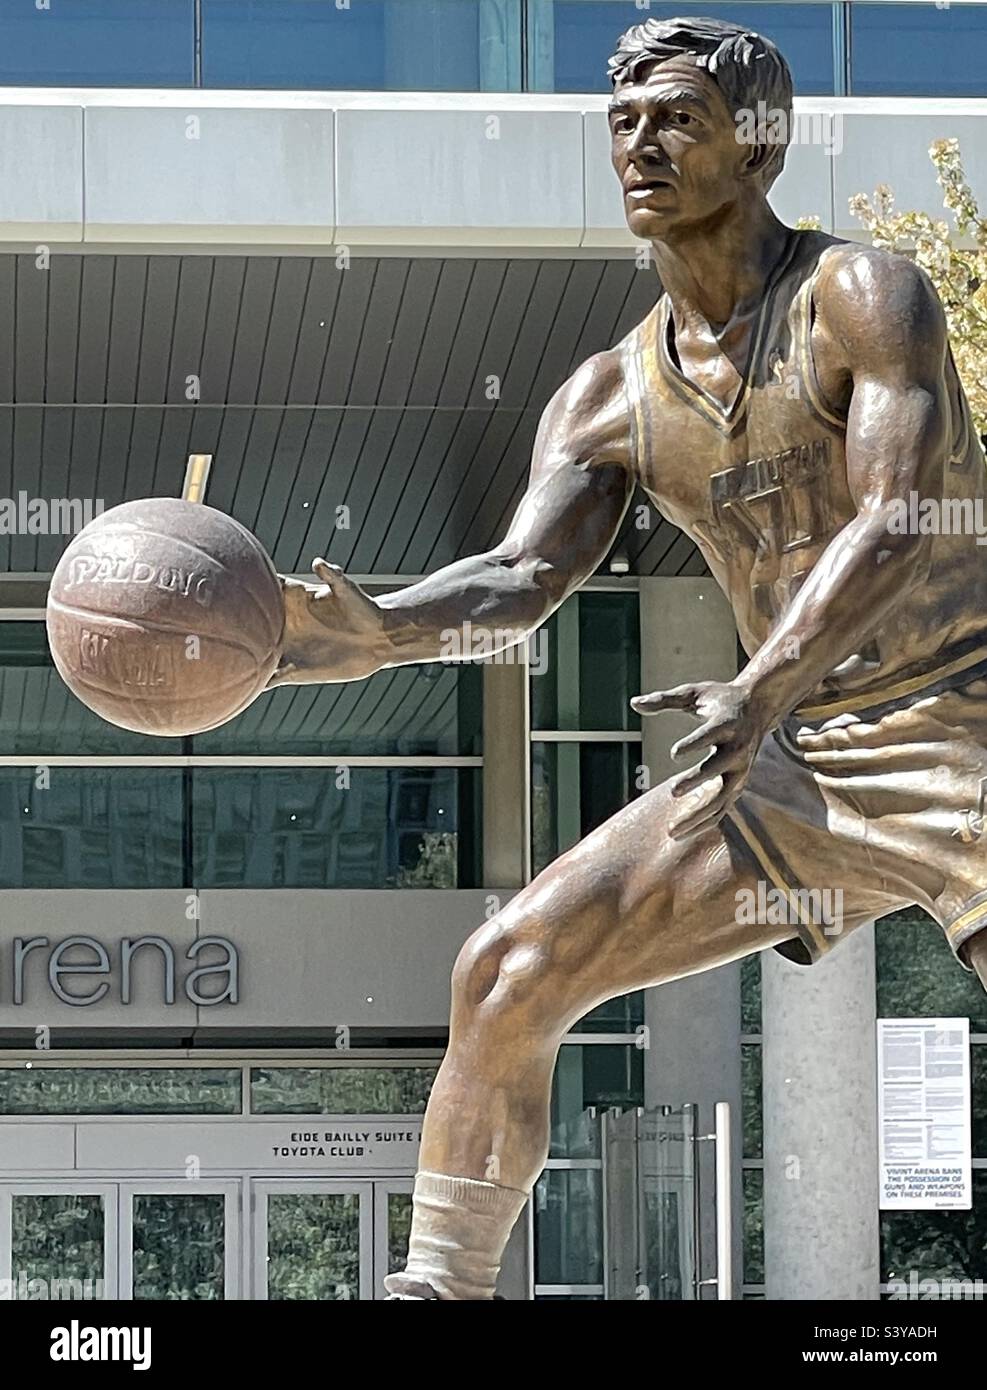 In front of the Vivint Arena, the home of the NBA team, The Utah Jazz, in downtown Salt Lake City, Utah, USA. This shows a larger than life bronze statue of one of the teams greats, John Stockton. Stock Photo